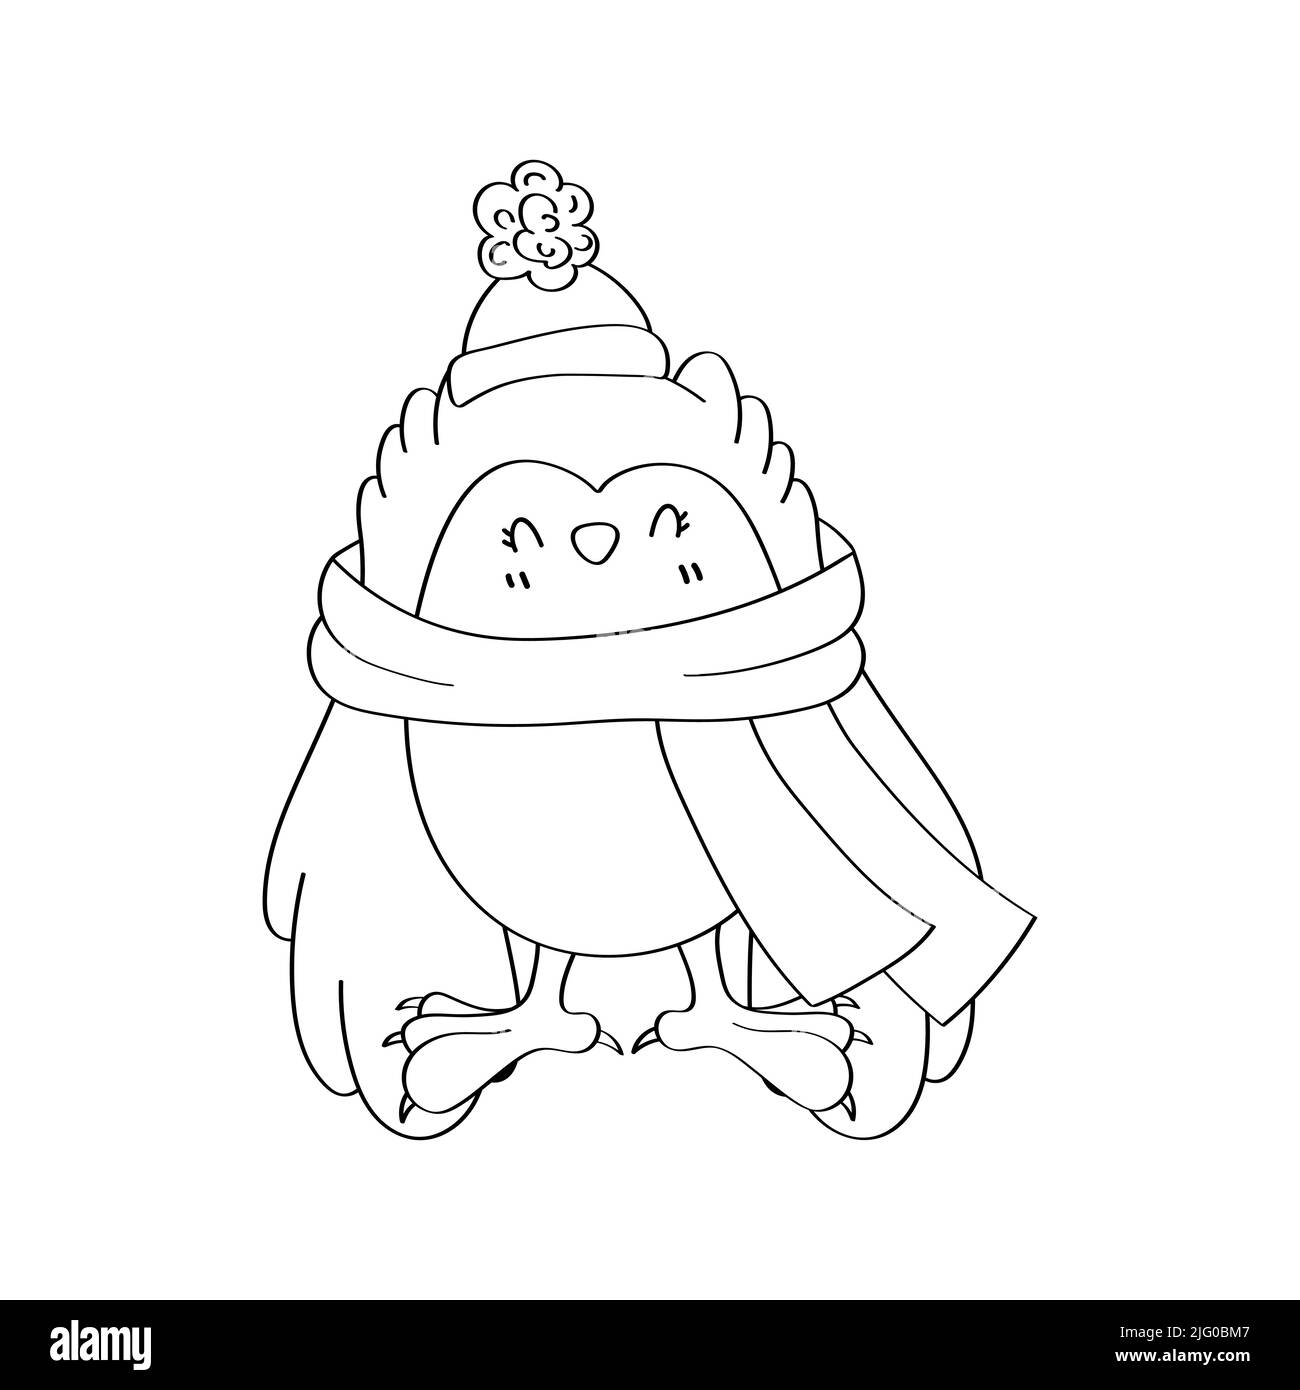 Cute Owl Clipart Black and White for Kids Holidays and Goods. Happy Clip Art Coloring Page Owl in a Hat and Scarf. Vector Illustration of a Bird for Stock Vector